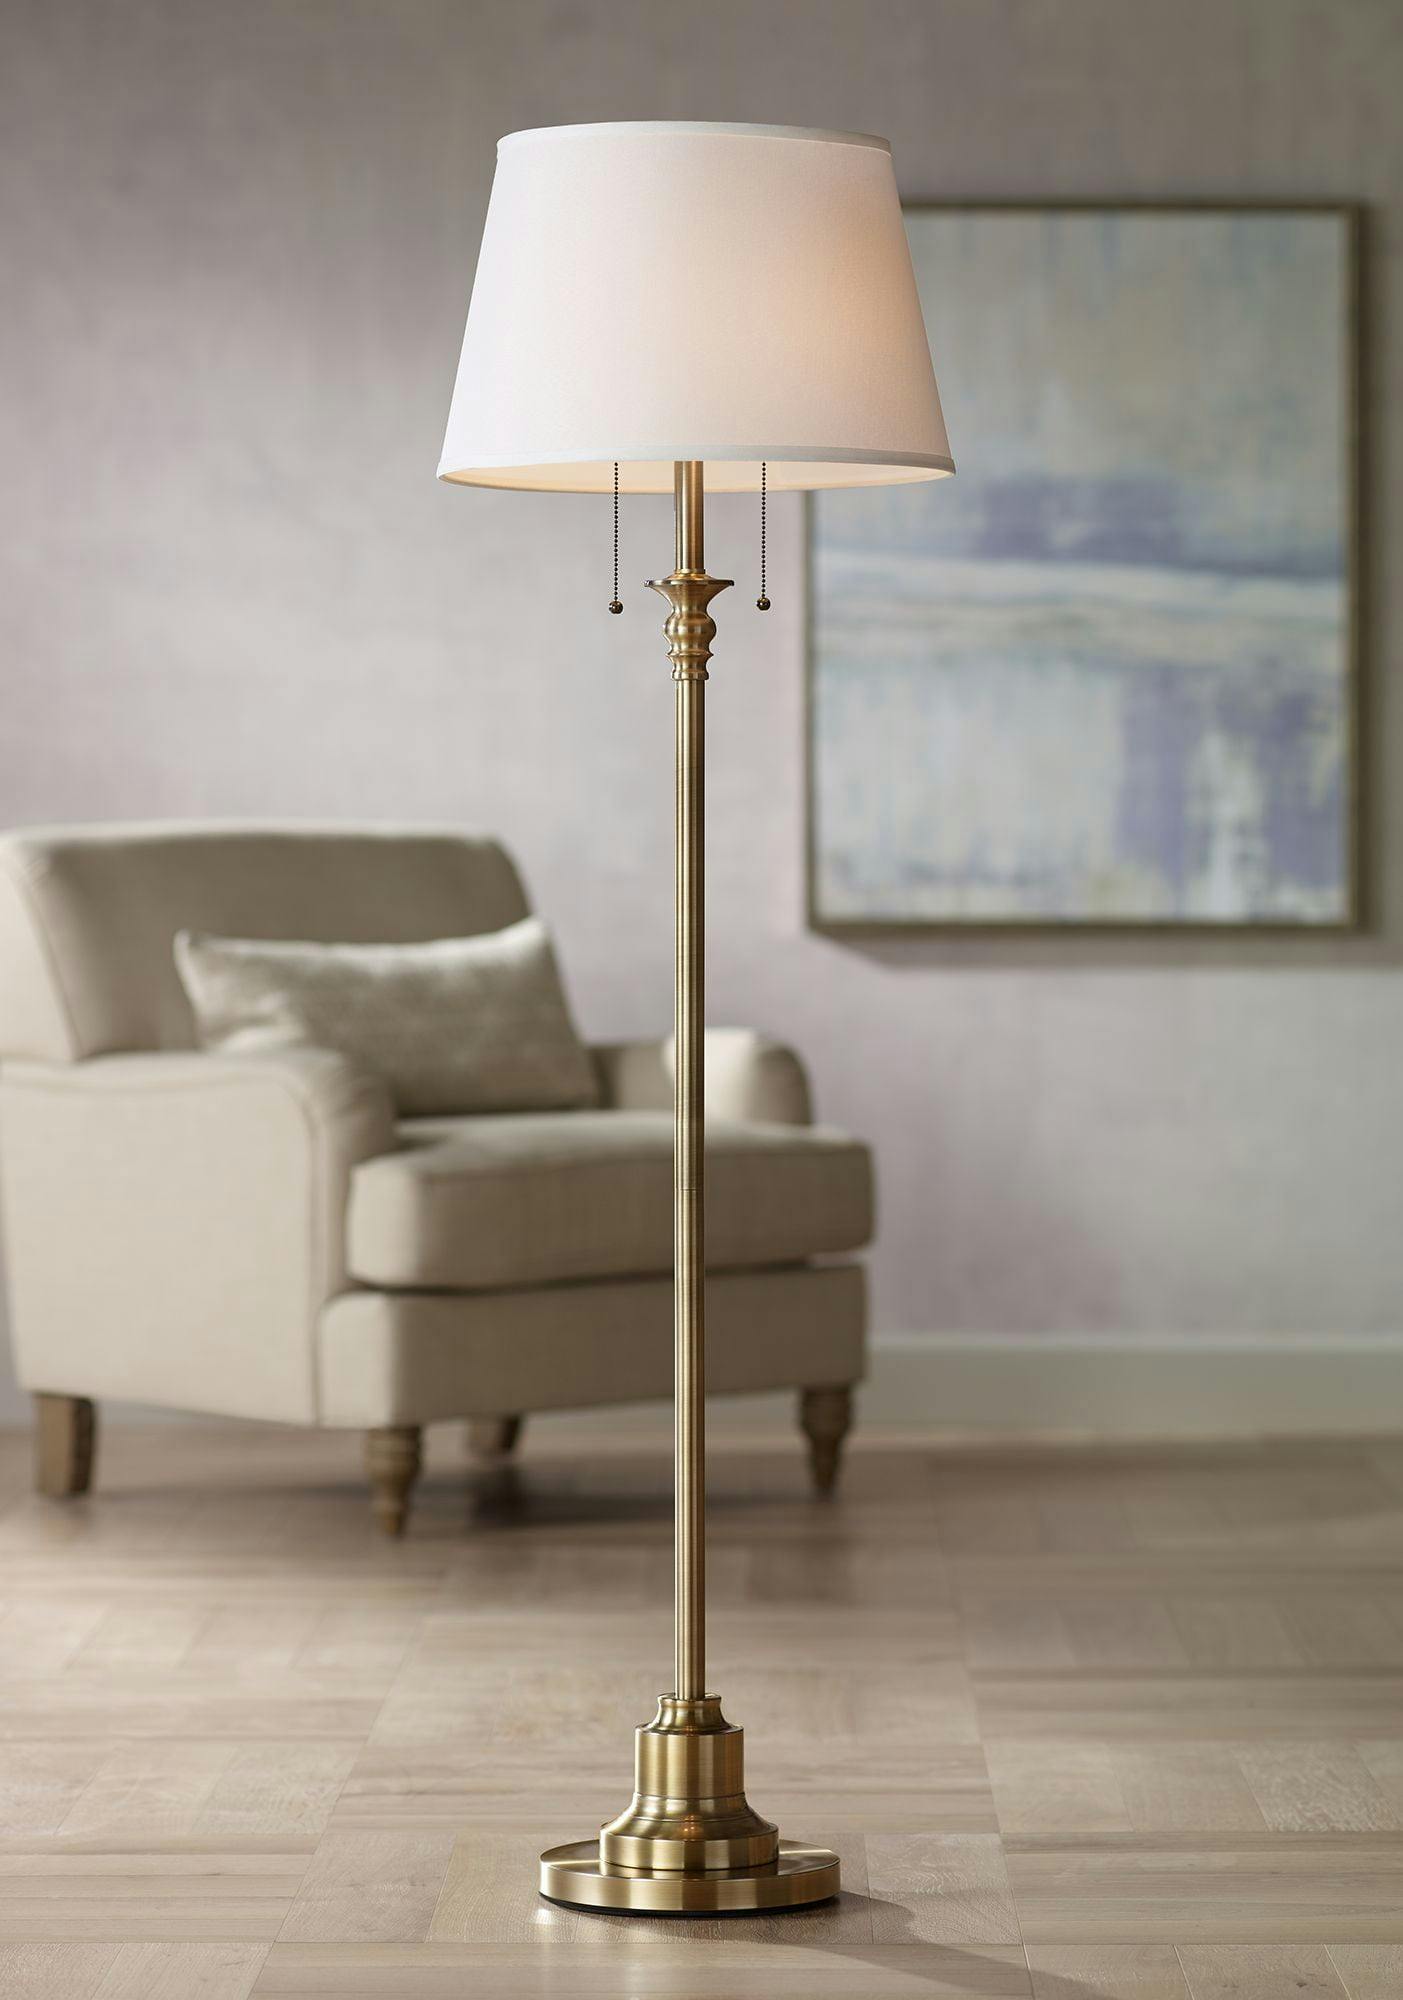 Classic Elegance Brushed Brass Floor Lamp with Off-White Linen Shade